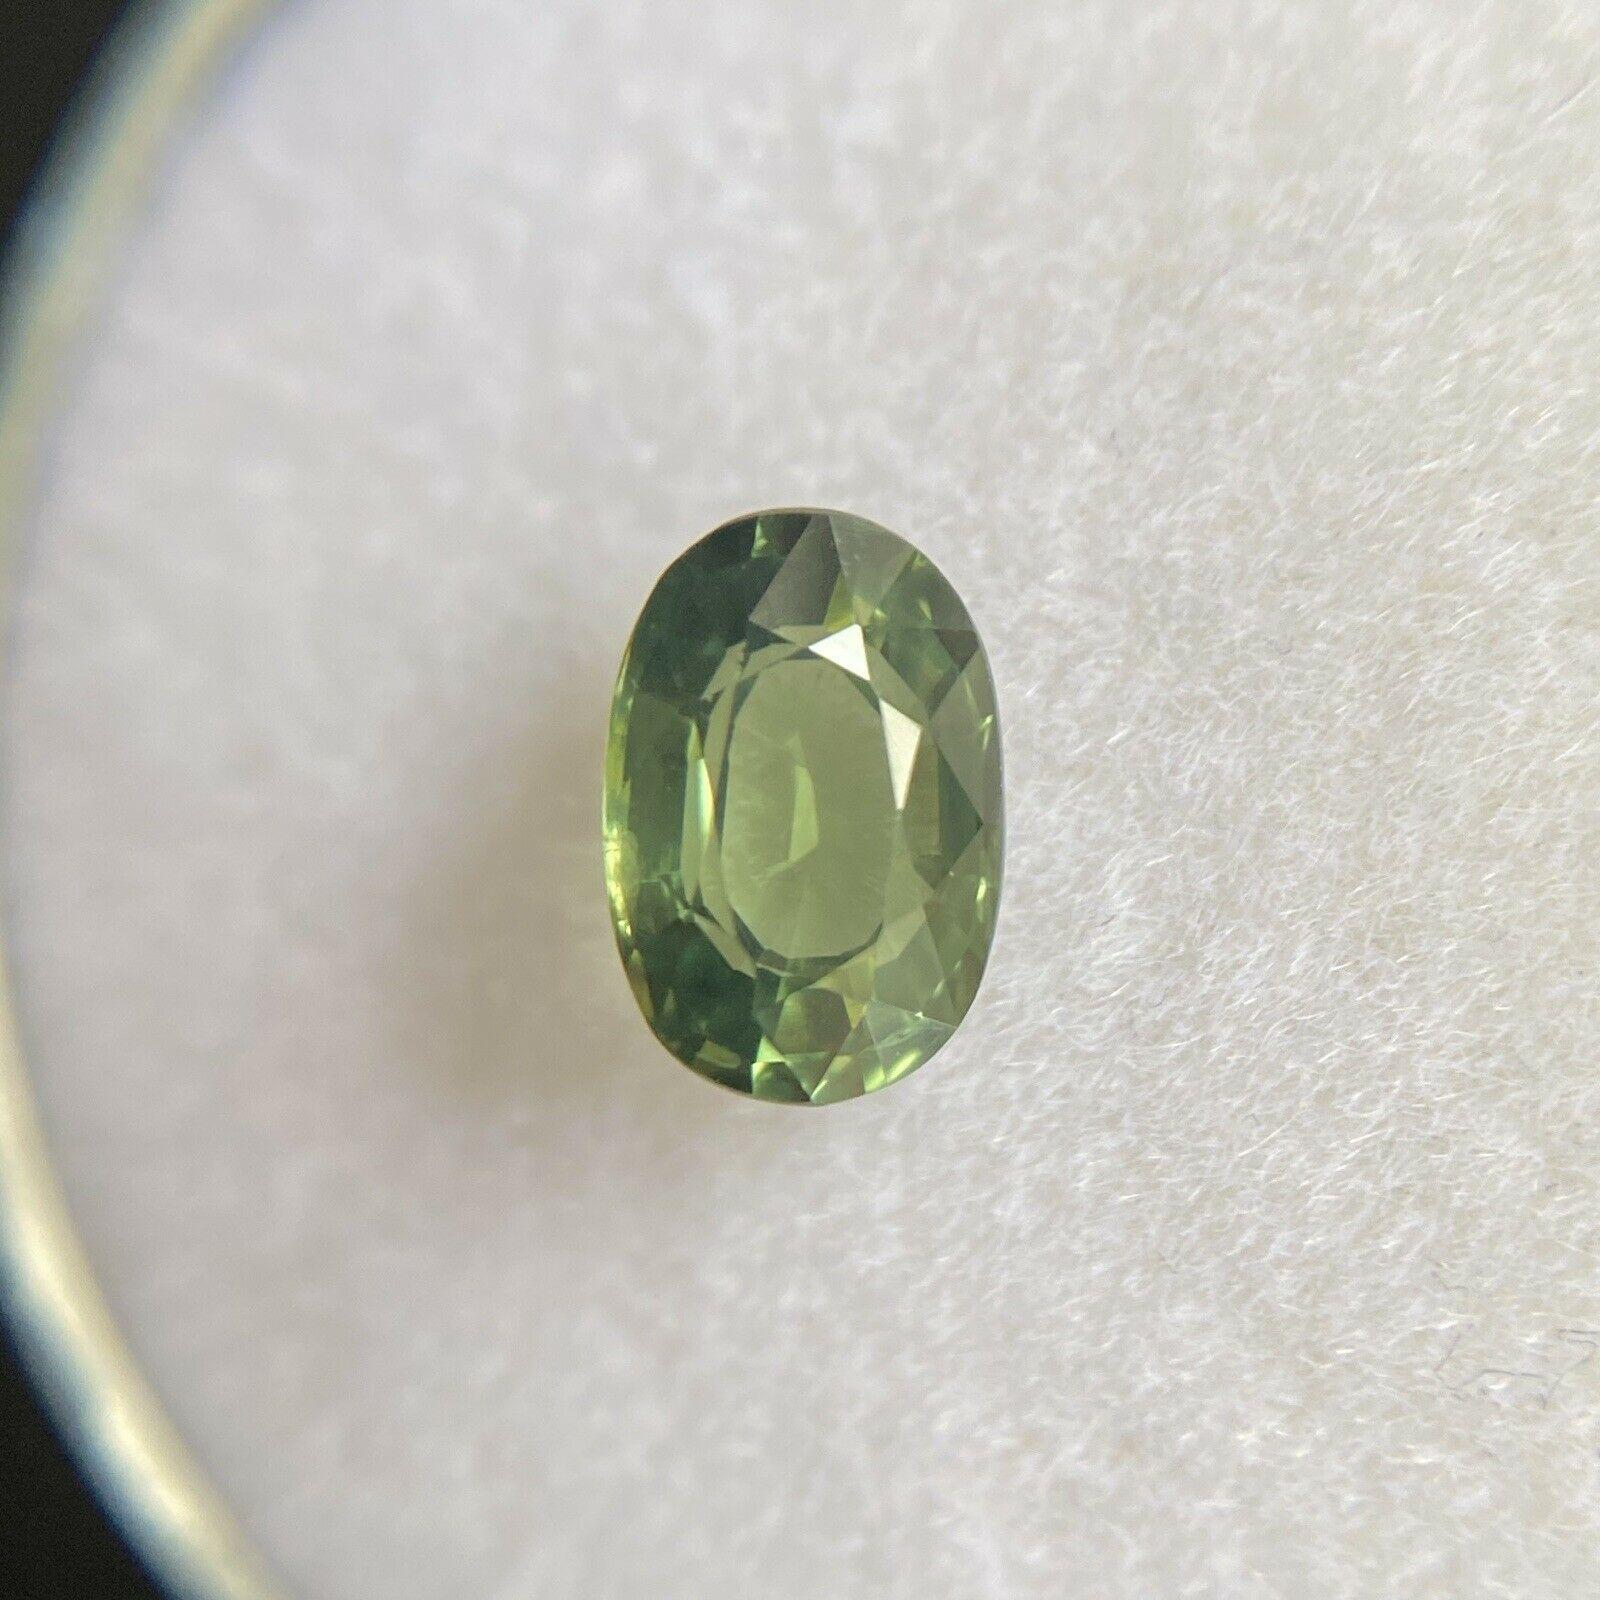 Vivid Green 0.88ct Australian Sapphire Oval Cut Loose Rare Gem 6.7 x 4.5mm

Natural Australian Green Sapphire Gemstone. 
0.88 Carat with a beautiful green colour and an excellent oval cut. Also has excellent clarity, very clean stone, practically